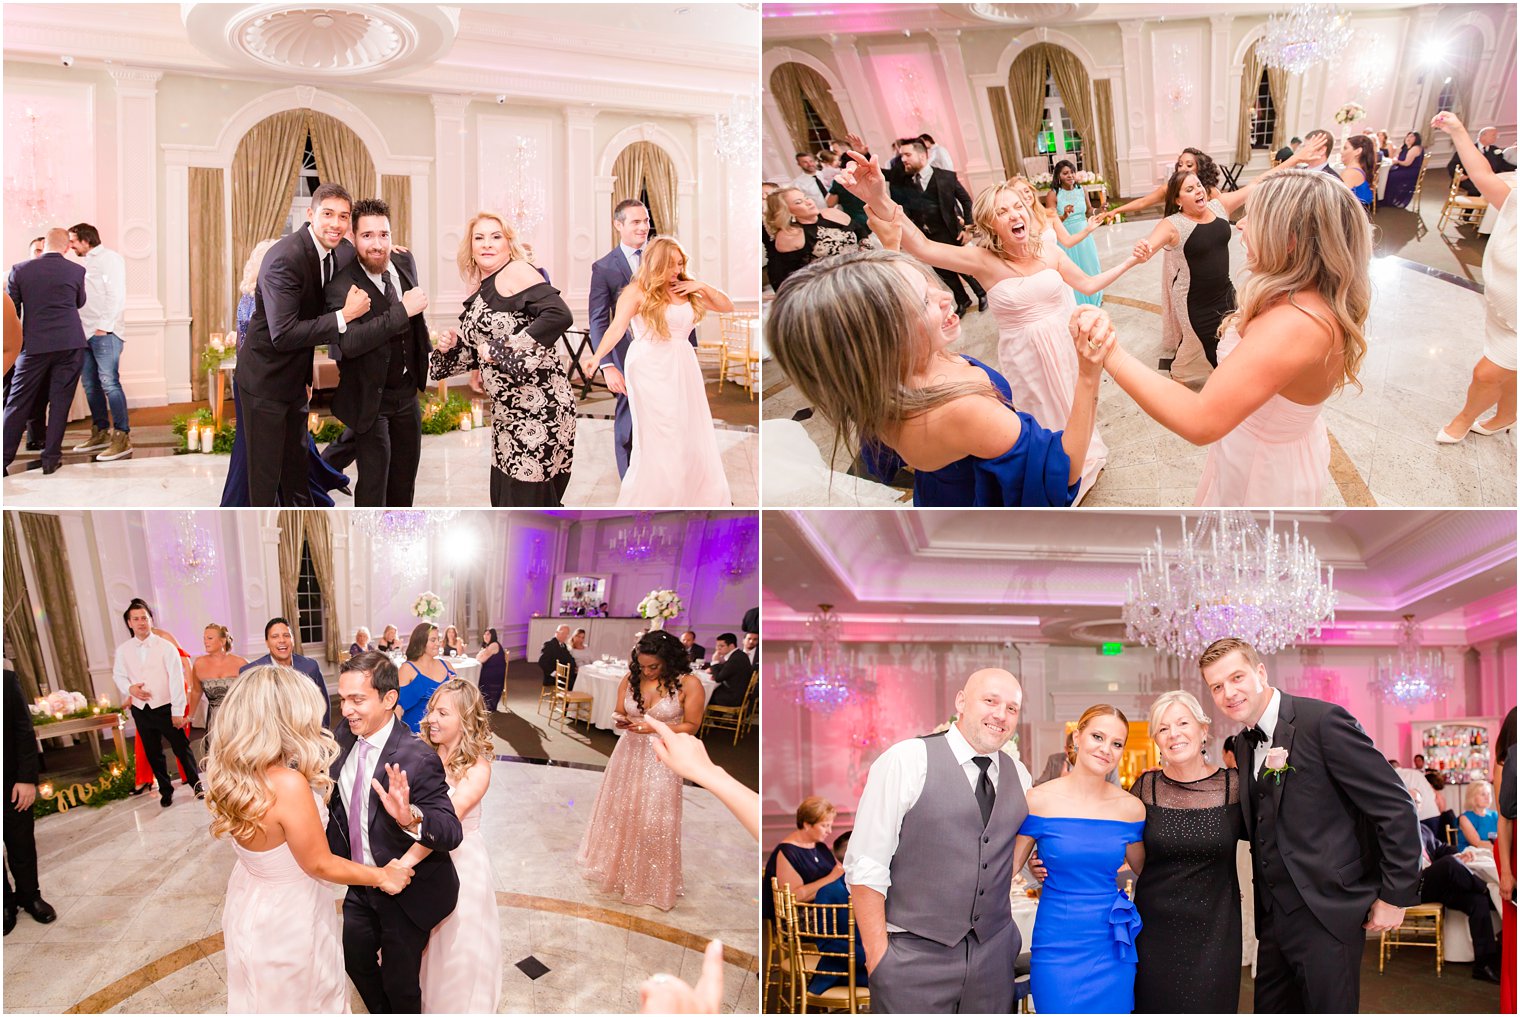 guests dancing at wedding reception at Rockleigh Country Club